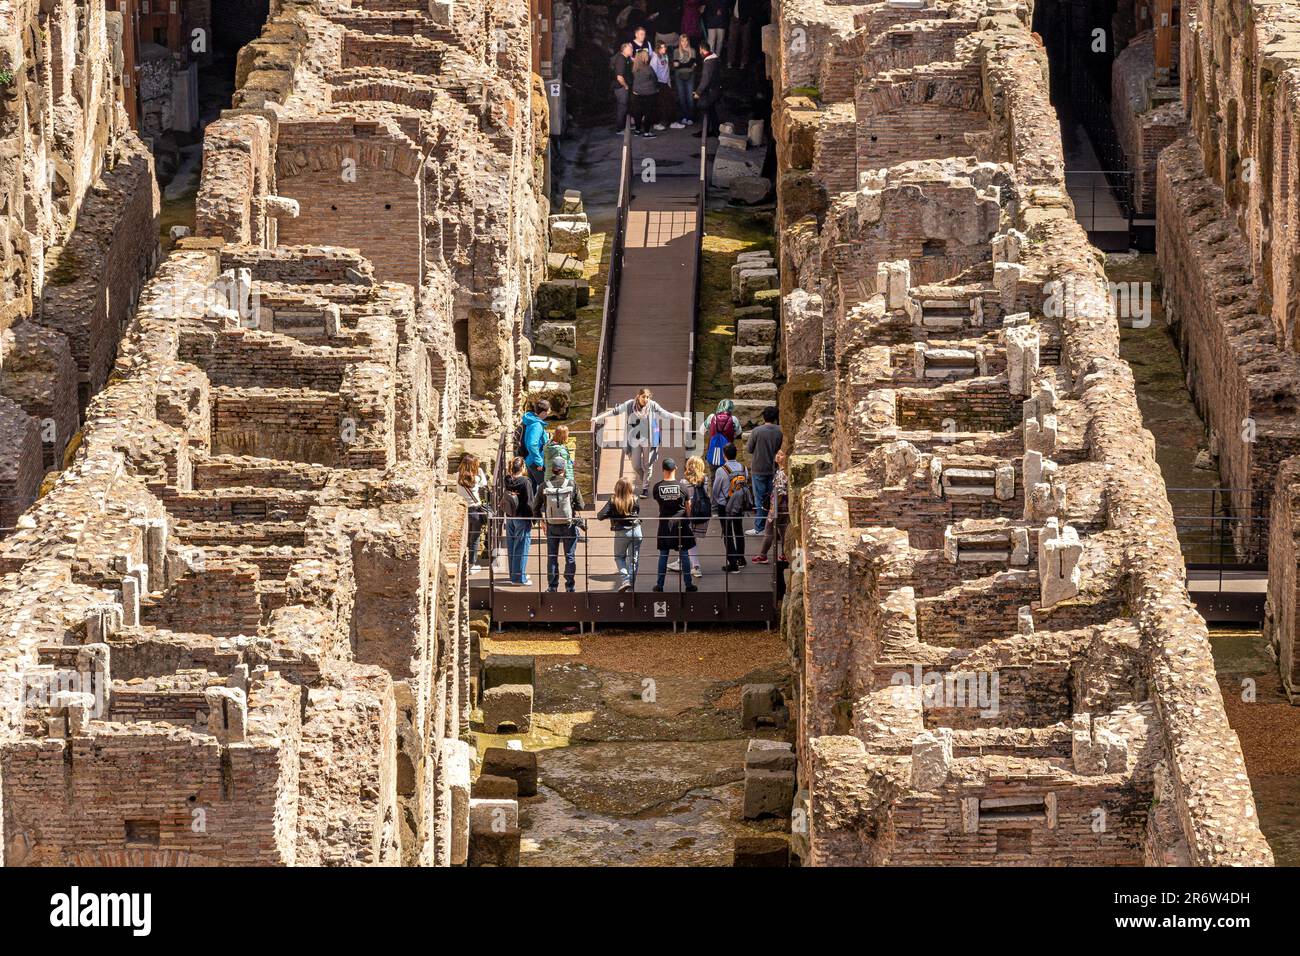 People visiting the underground dungeons, hypogeum area of the   lower level Colosseum in Rome ,Rome,Italy Stock Photo